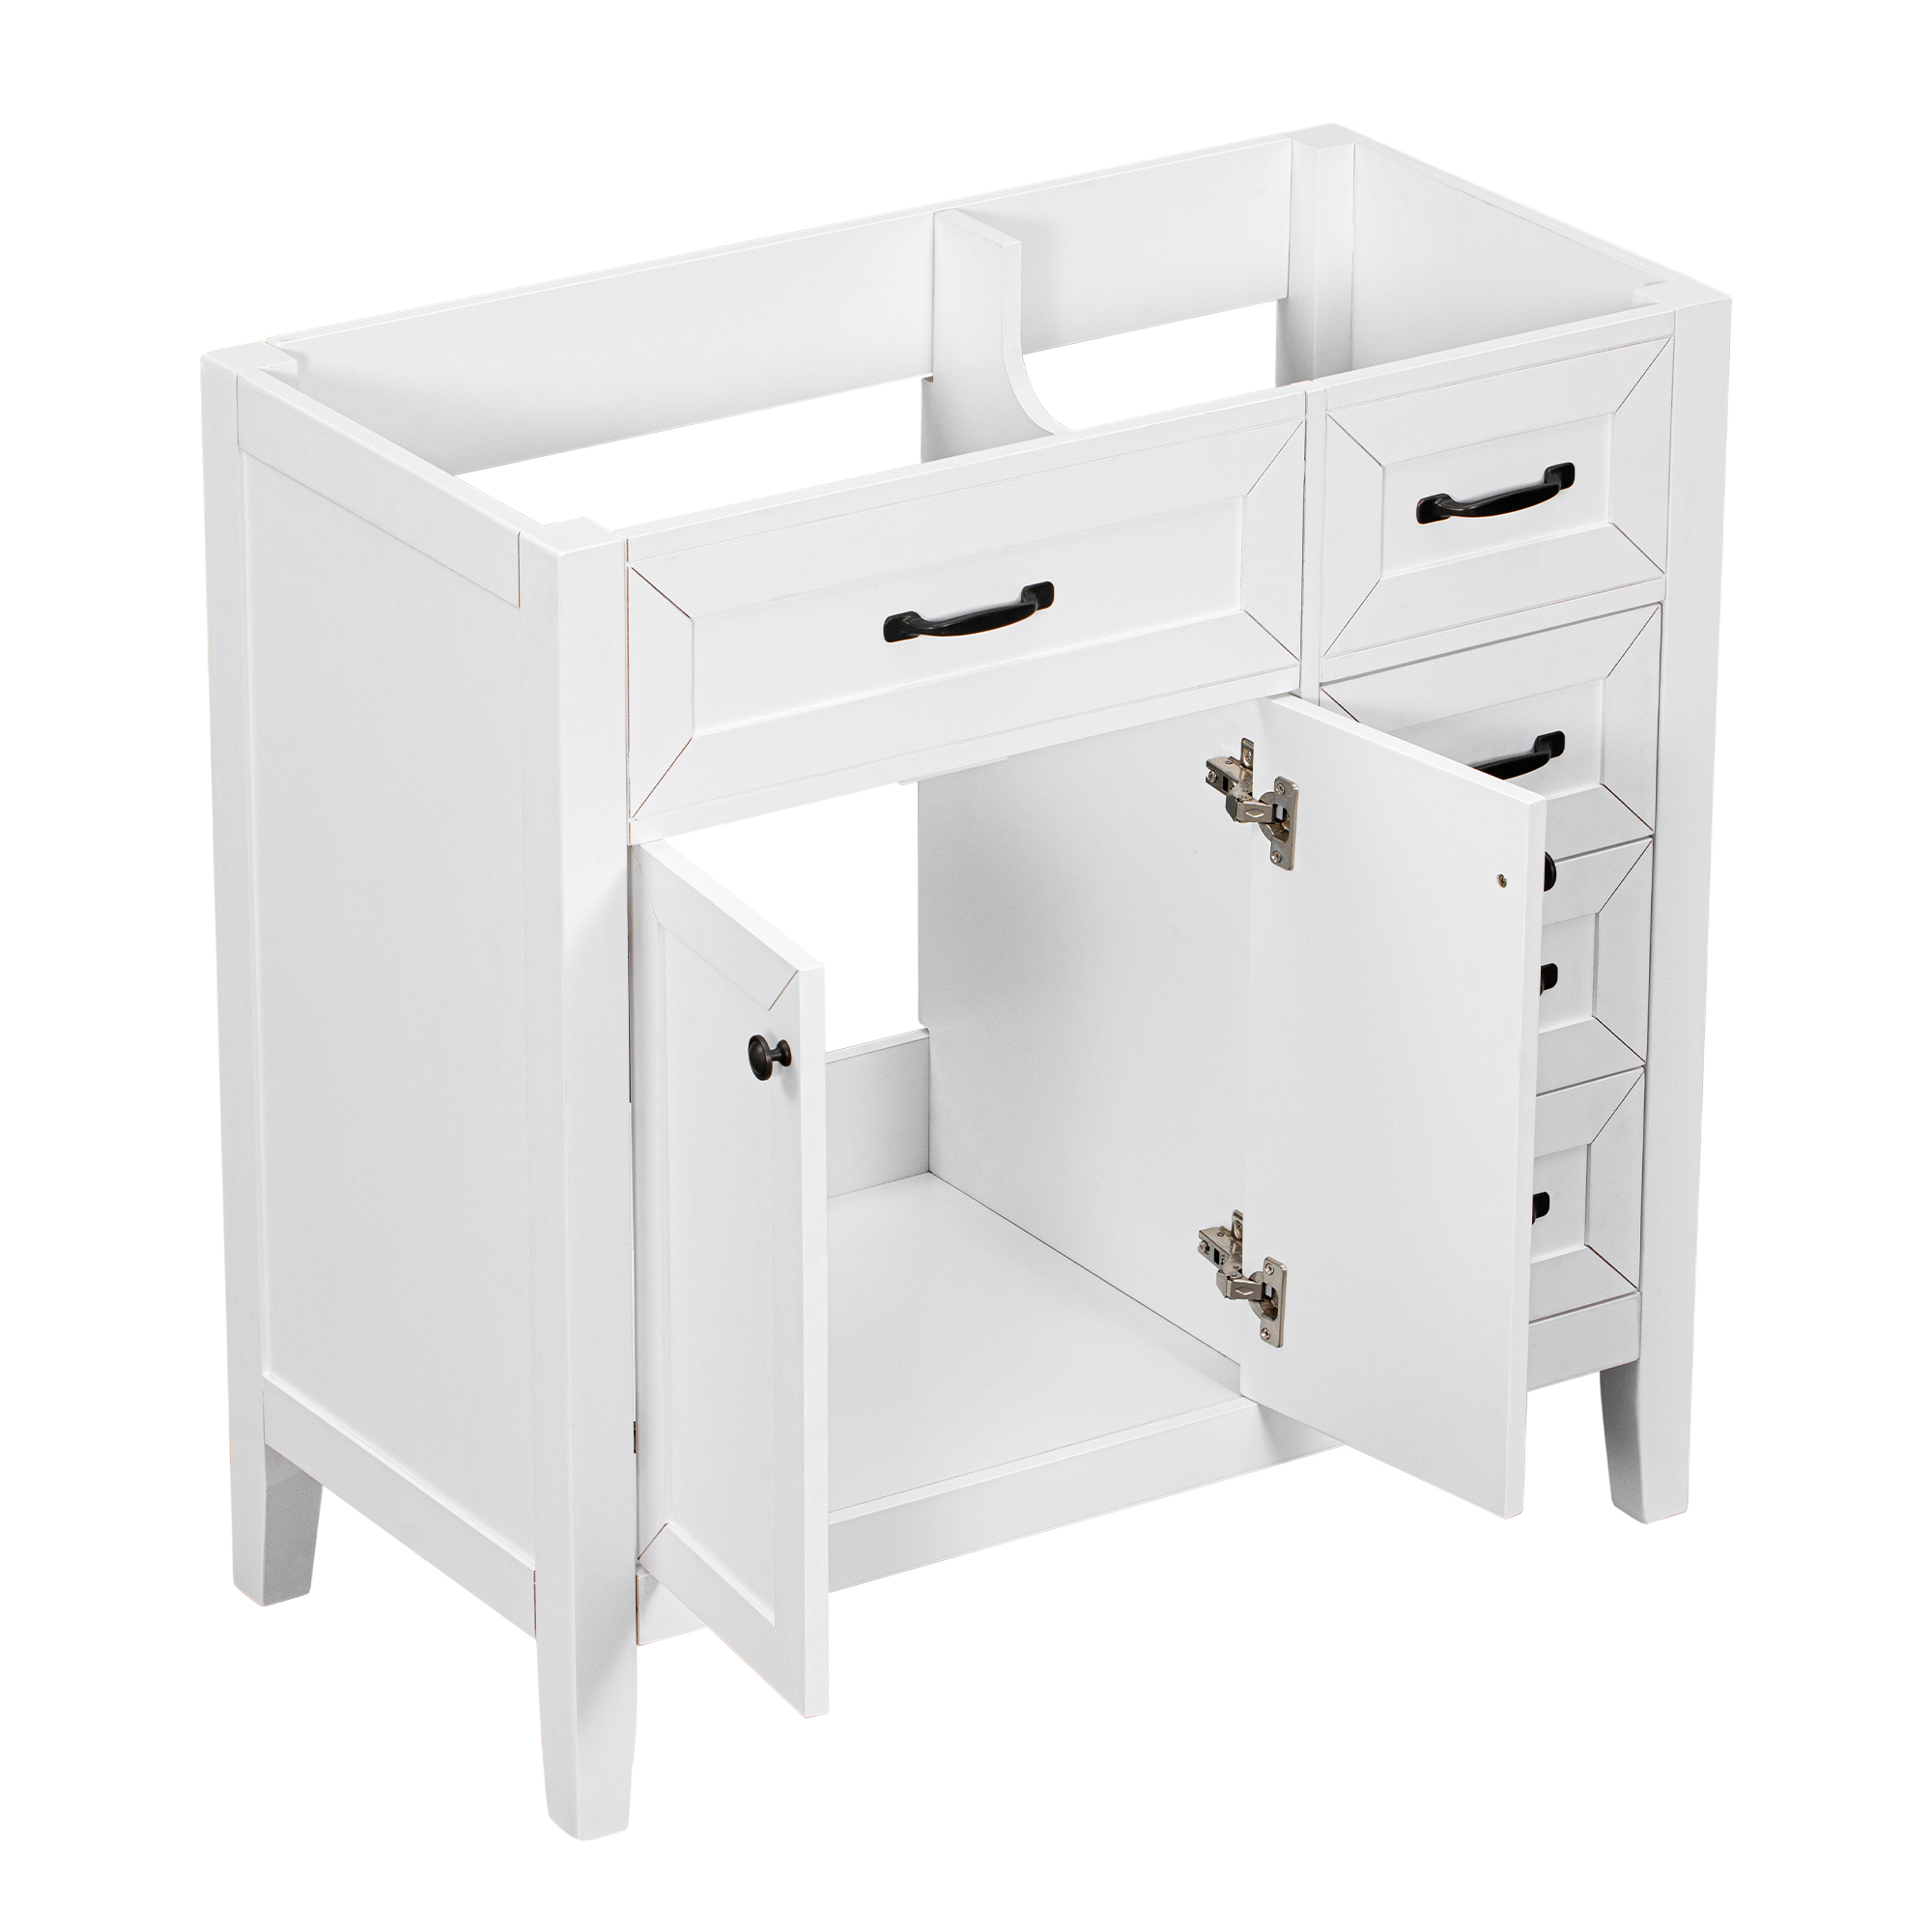 Solid Wood Bathroom Cabinet with Drawers - WF296707AAK